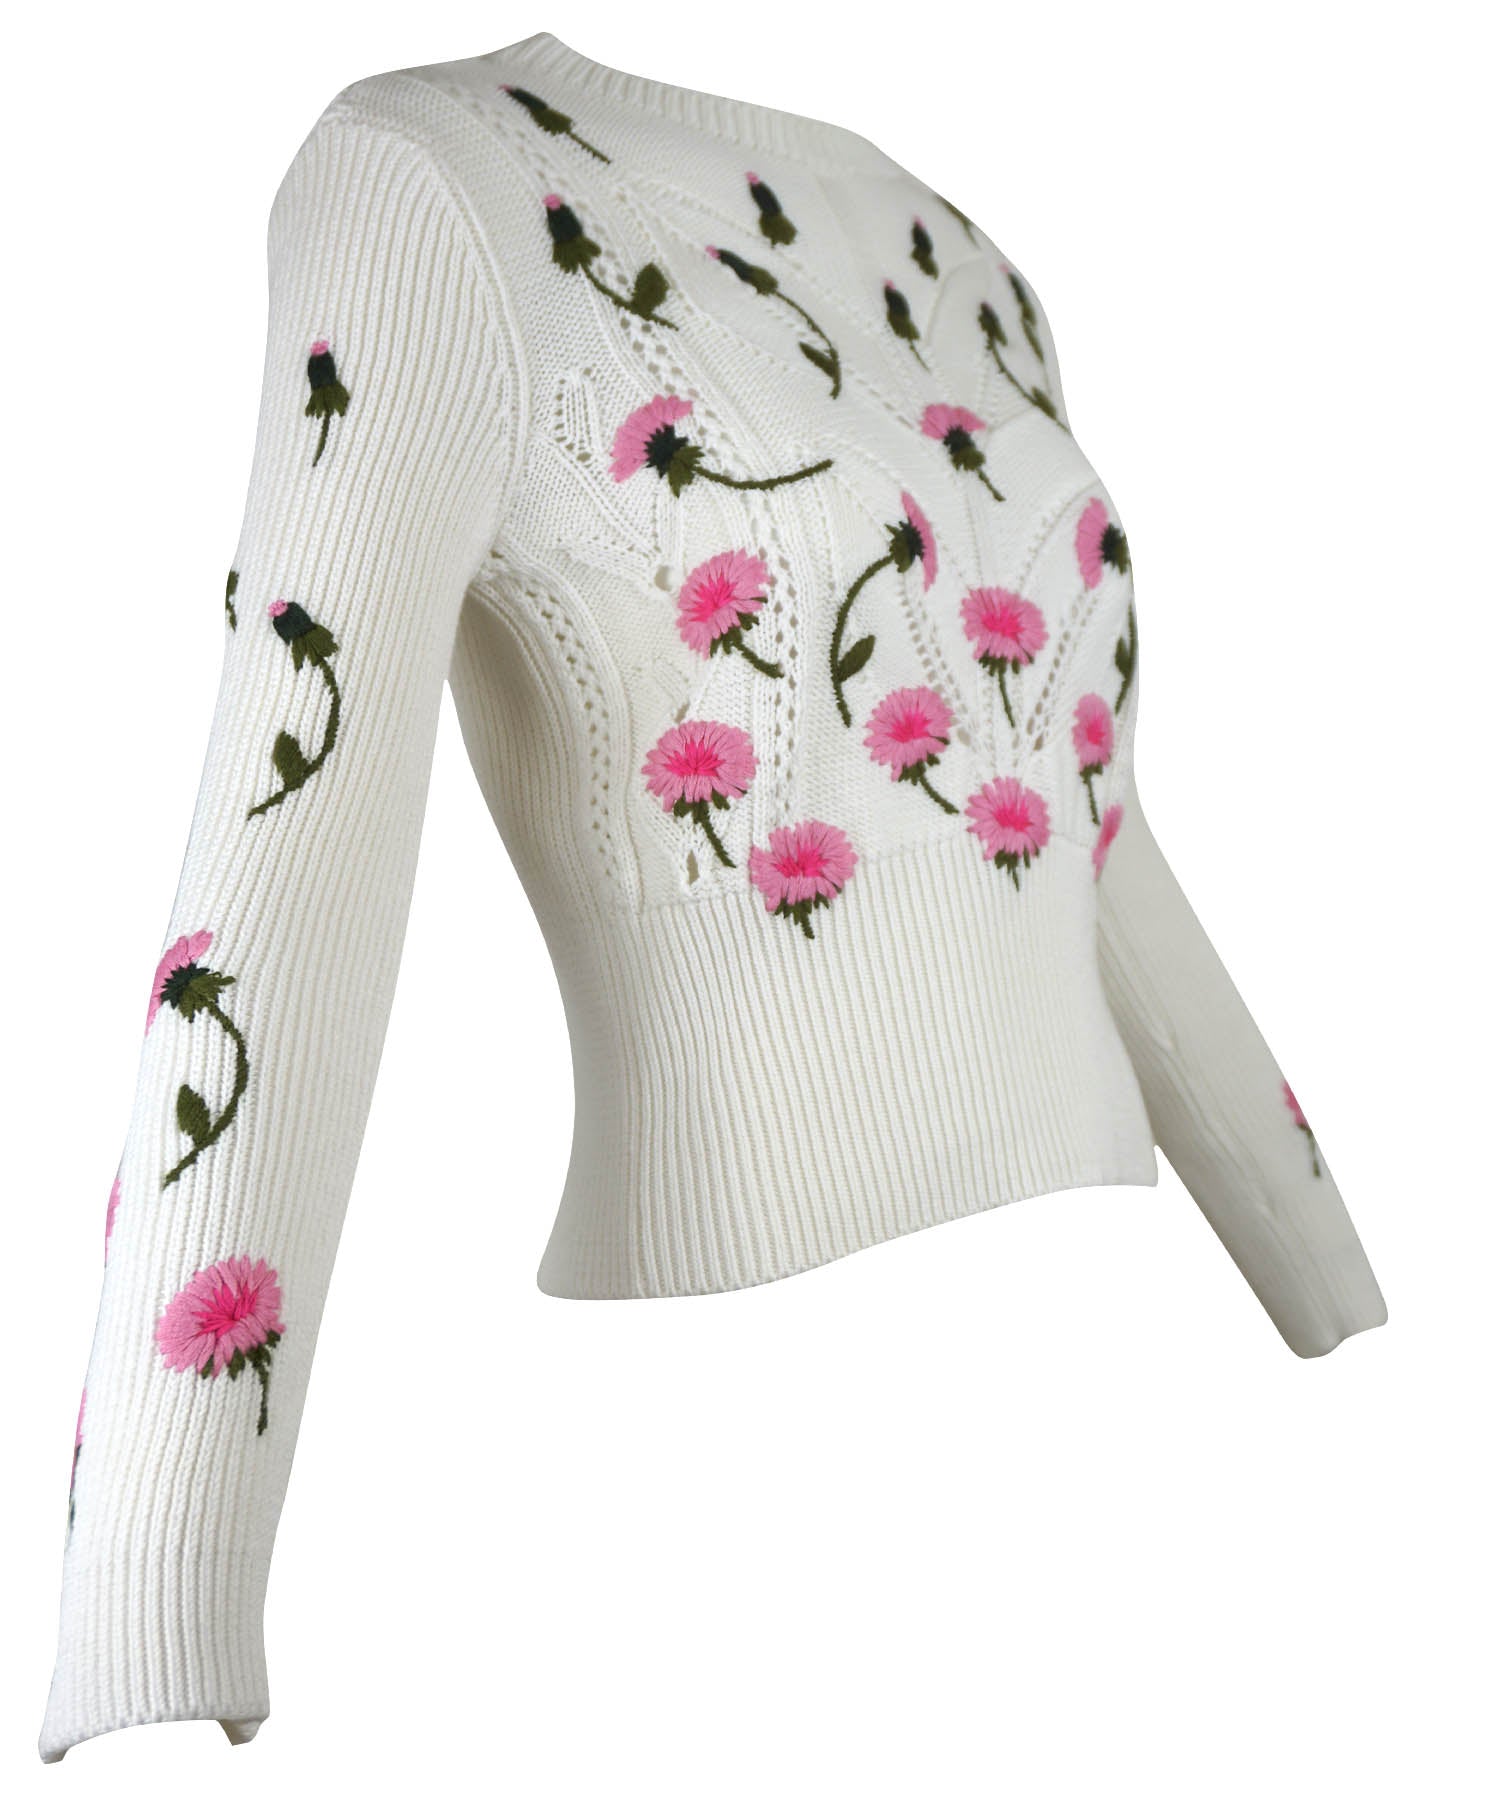 Valentino Rosebud Embroidered Open Weave Sweater - Foxy Couture Carmel